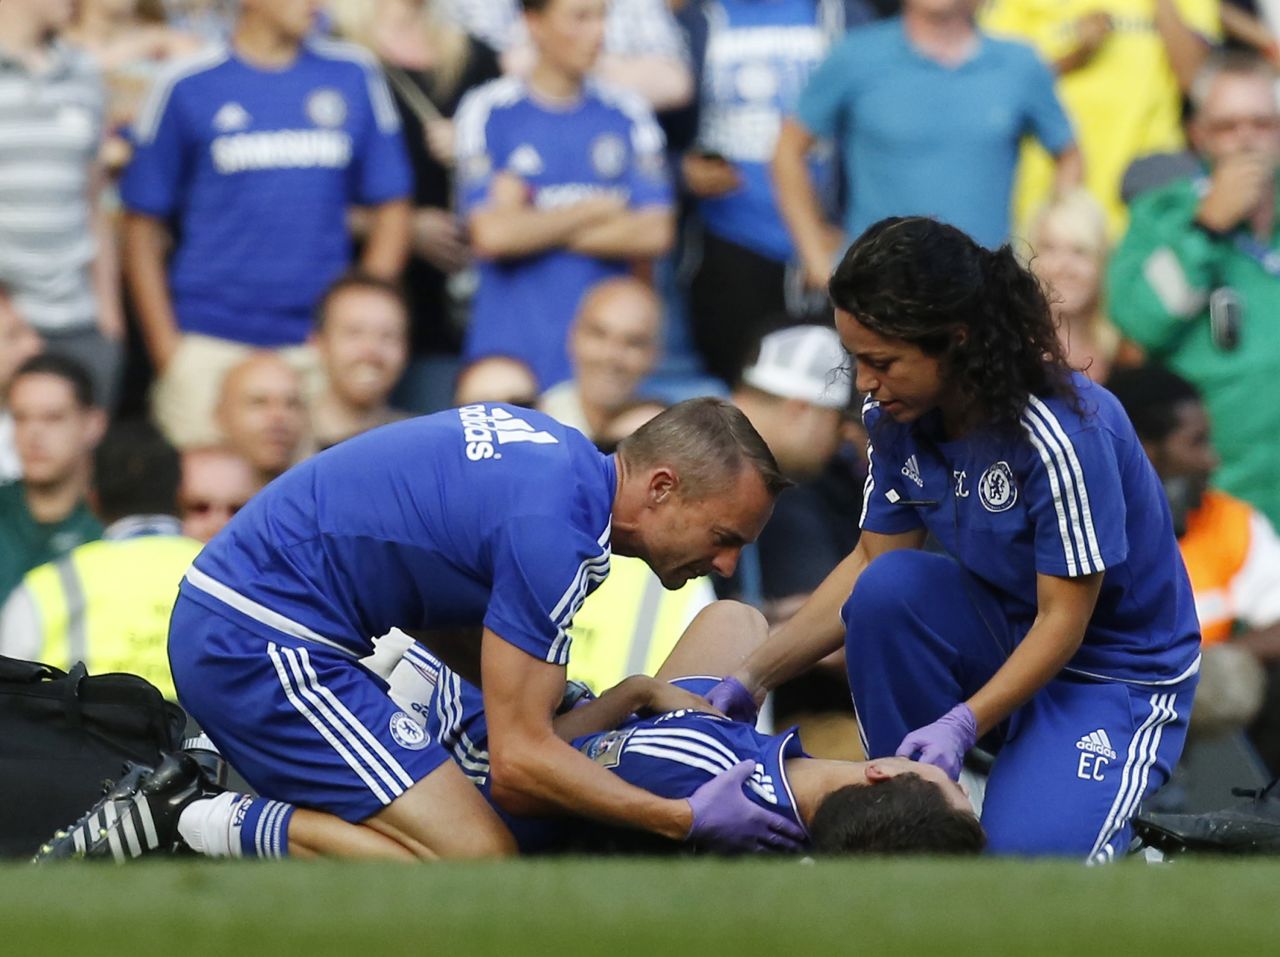 Chelsea doctor Eva Carneiro and physio Jon Fearn angered Mourinho by entering the field of play to treat Eden Hazard during the 2-2 draw against Swansea City on the opening day of the season. Mourinho has been heavily criticized for his behavior towards Carneiro, who subsequently left the club.